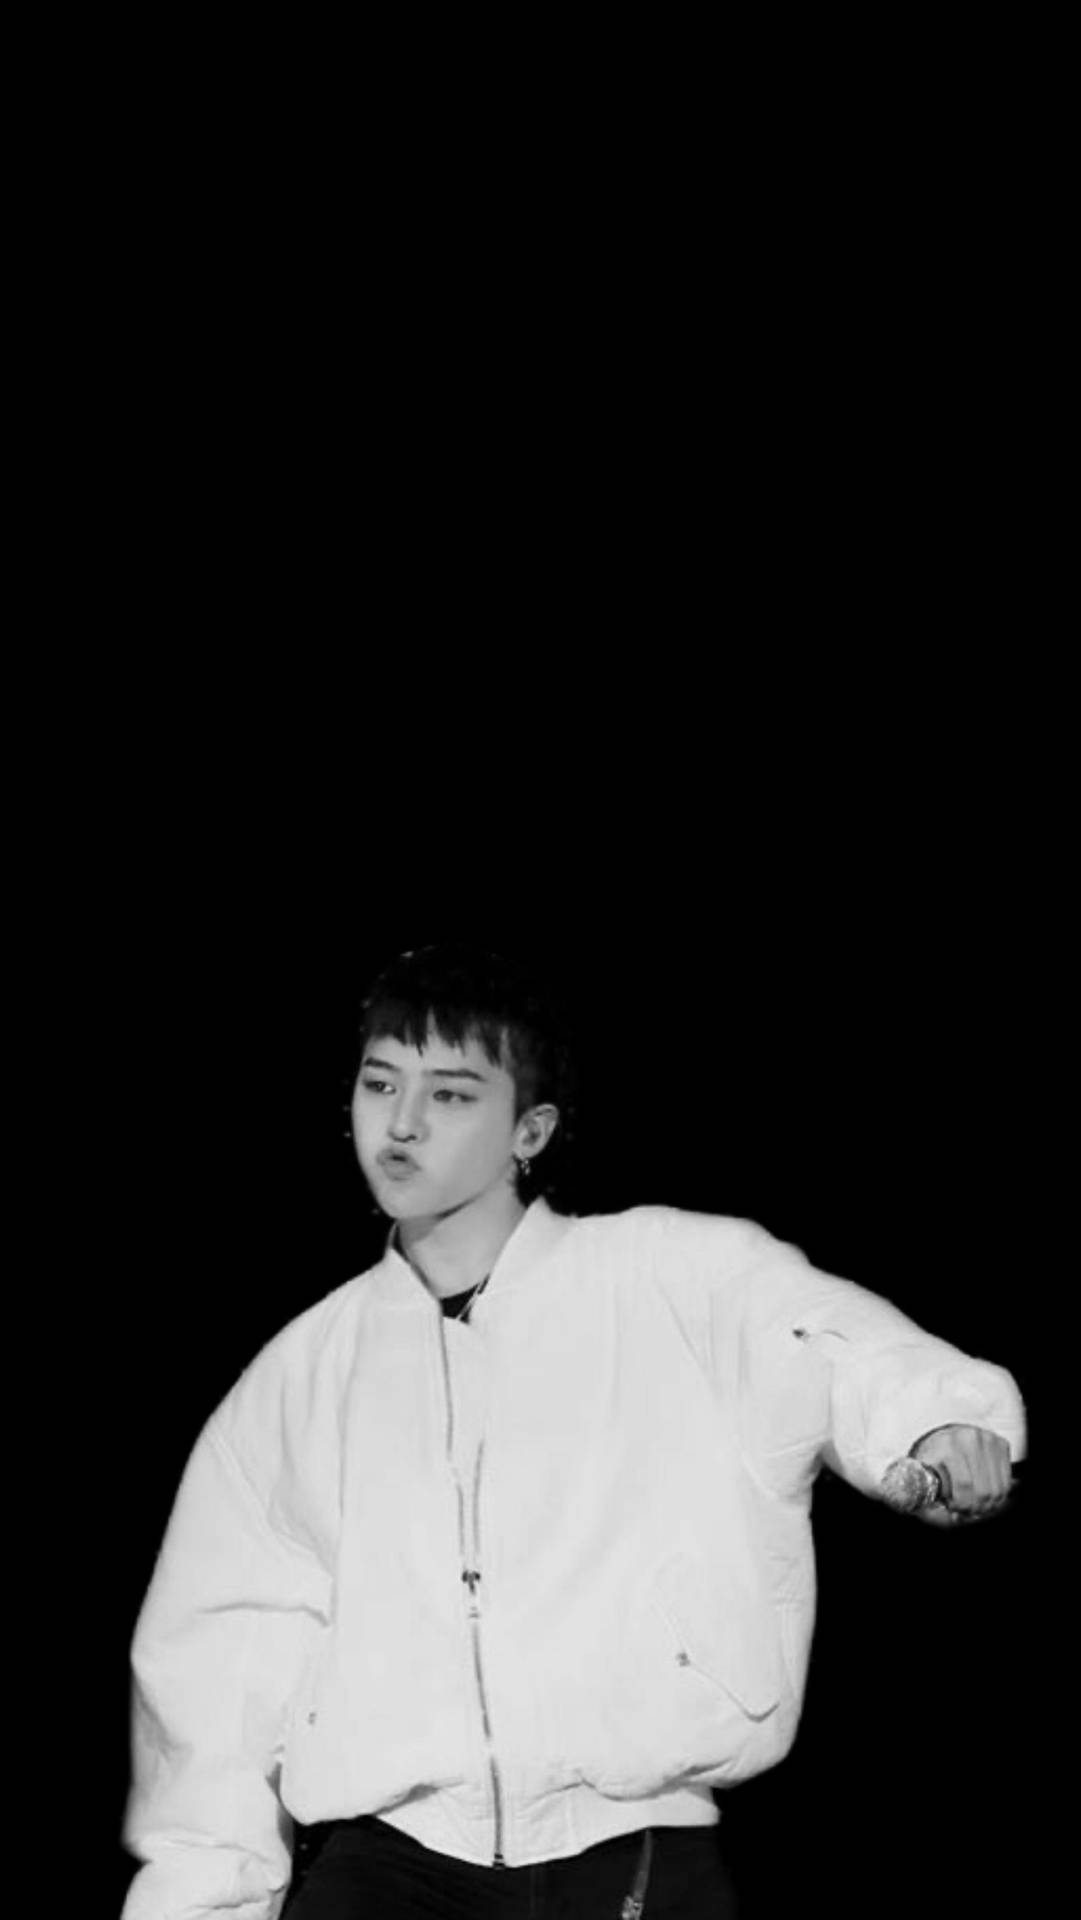 G-dragon Black And White Background